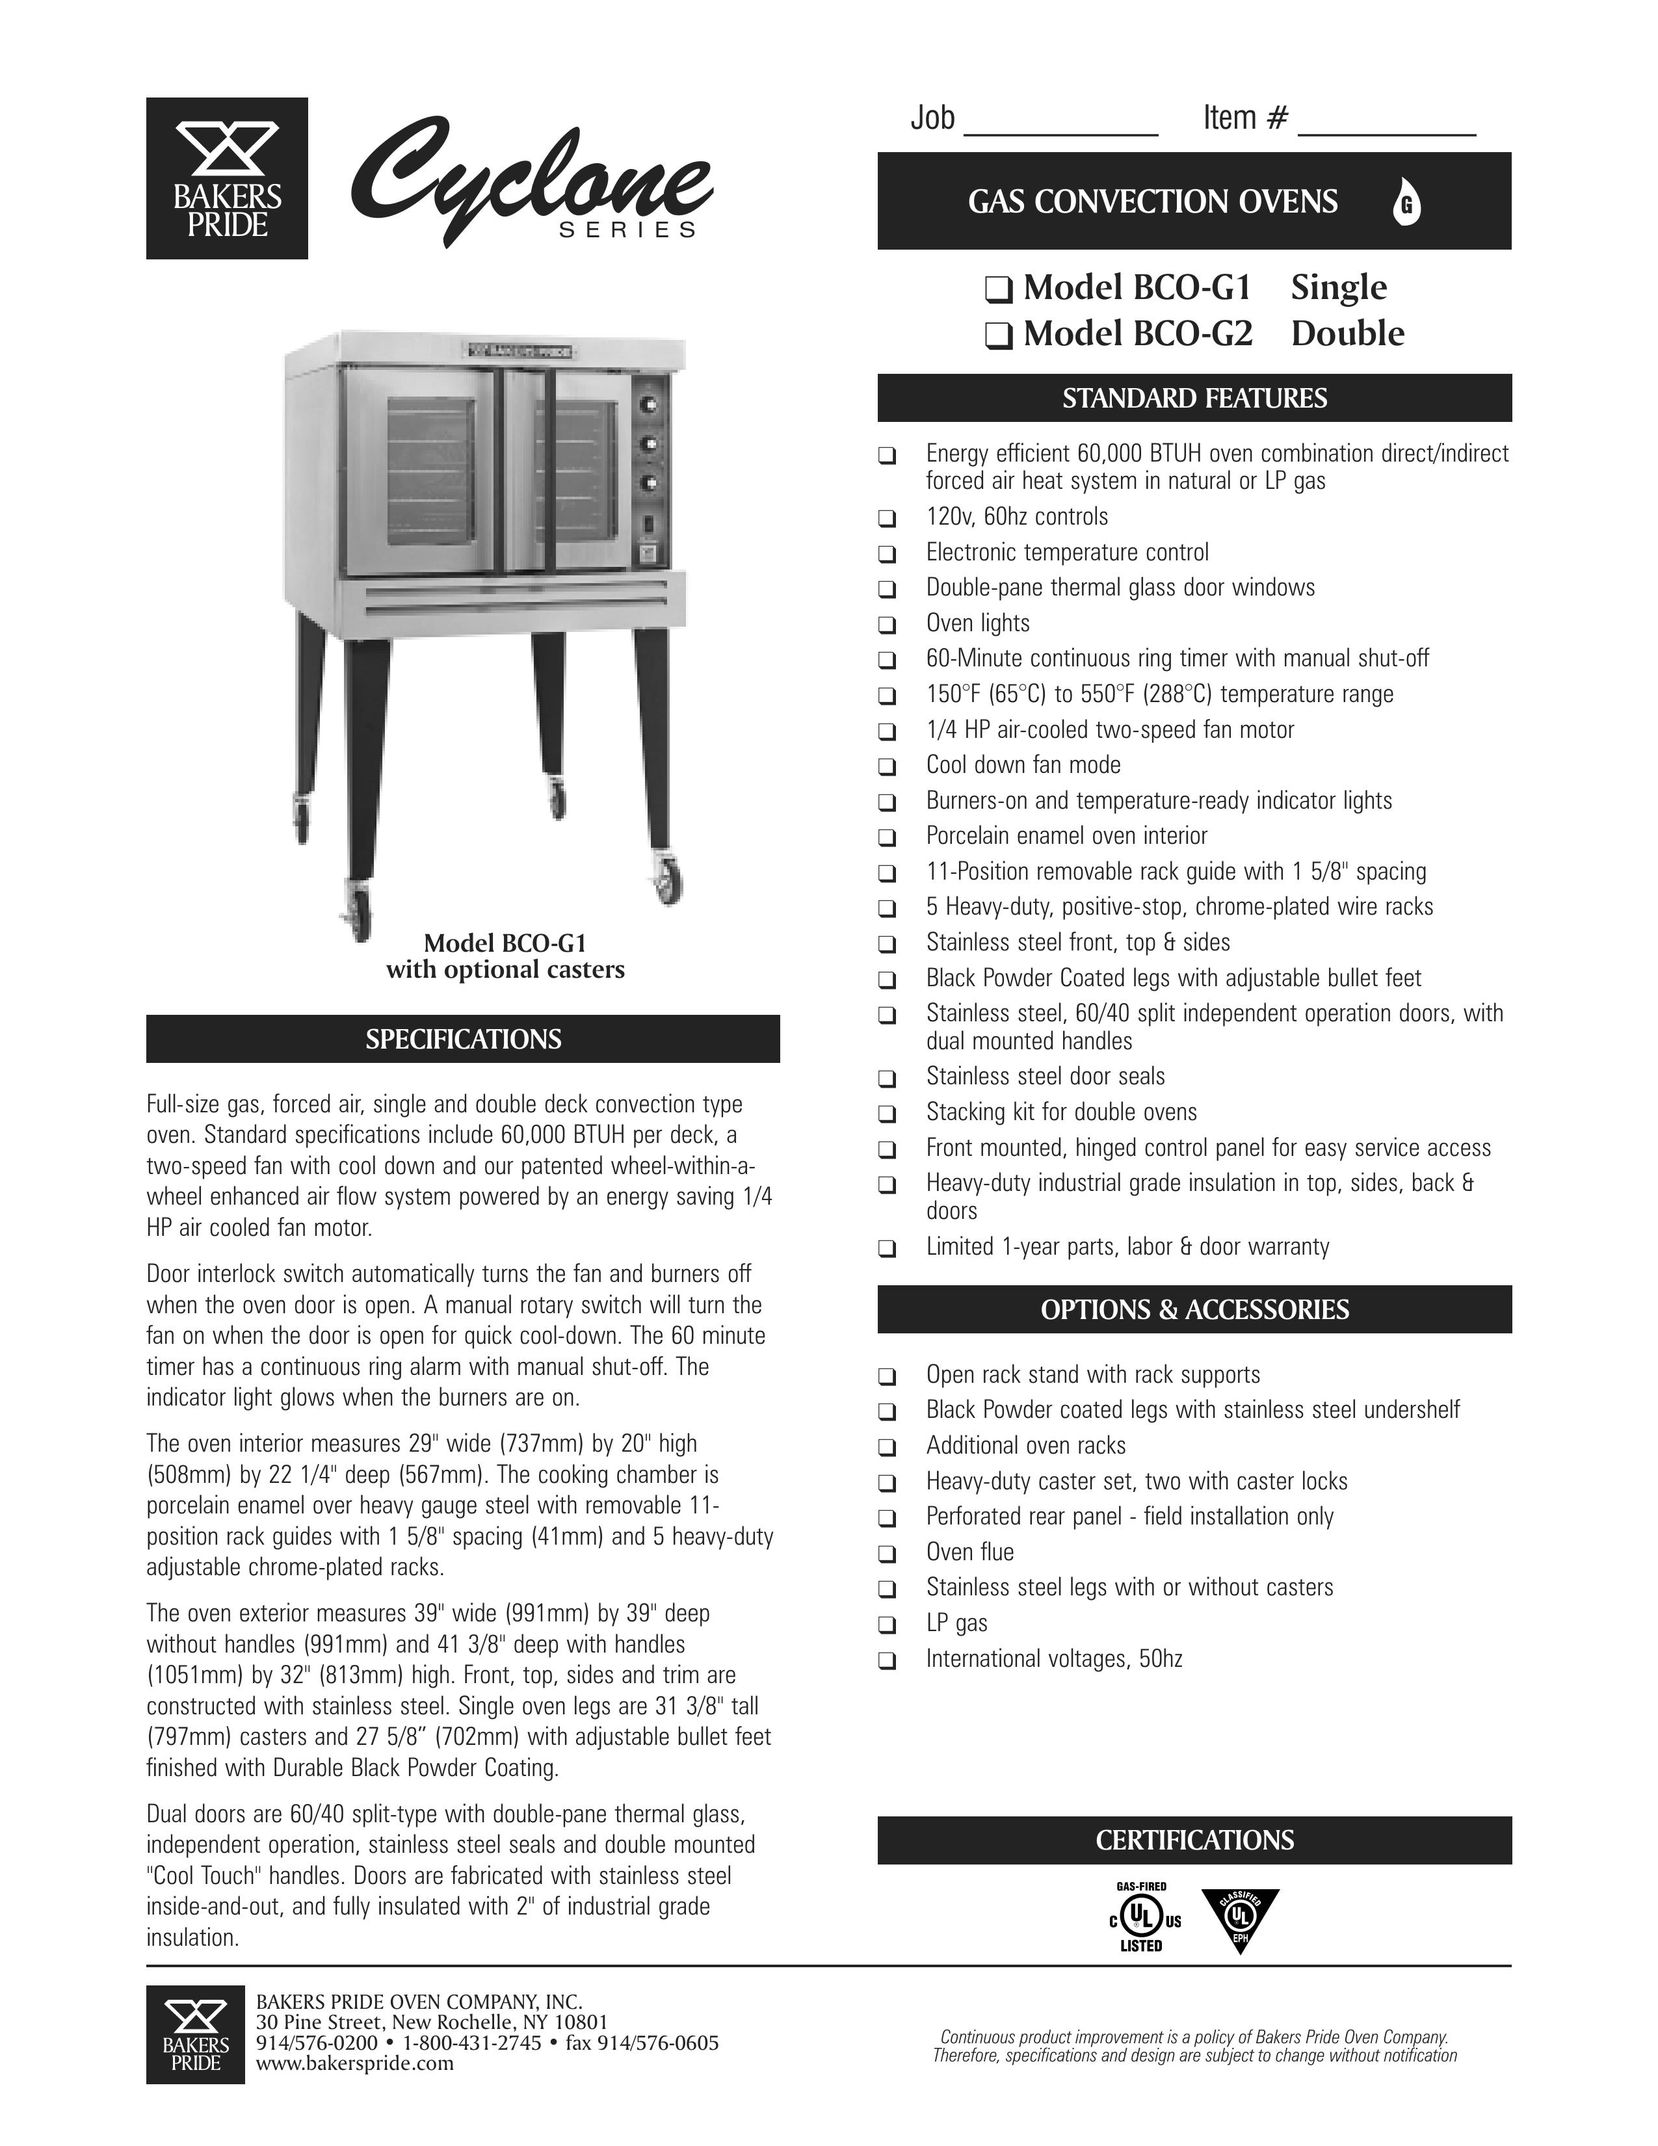 Bakers Pride Oven BCO-G2 Convection Oven User Manual